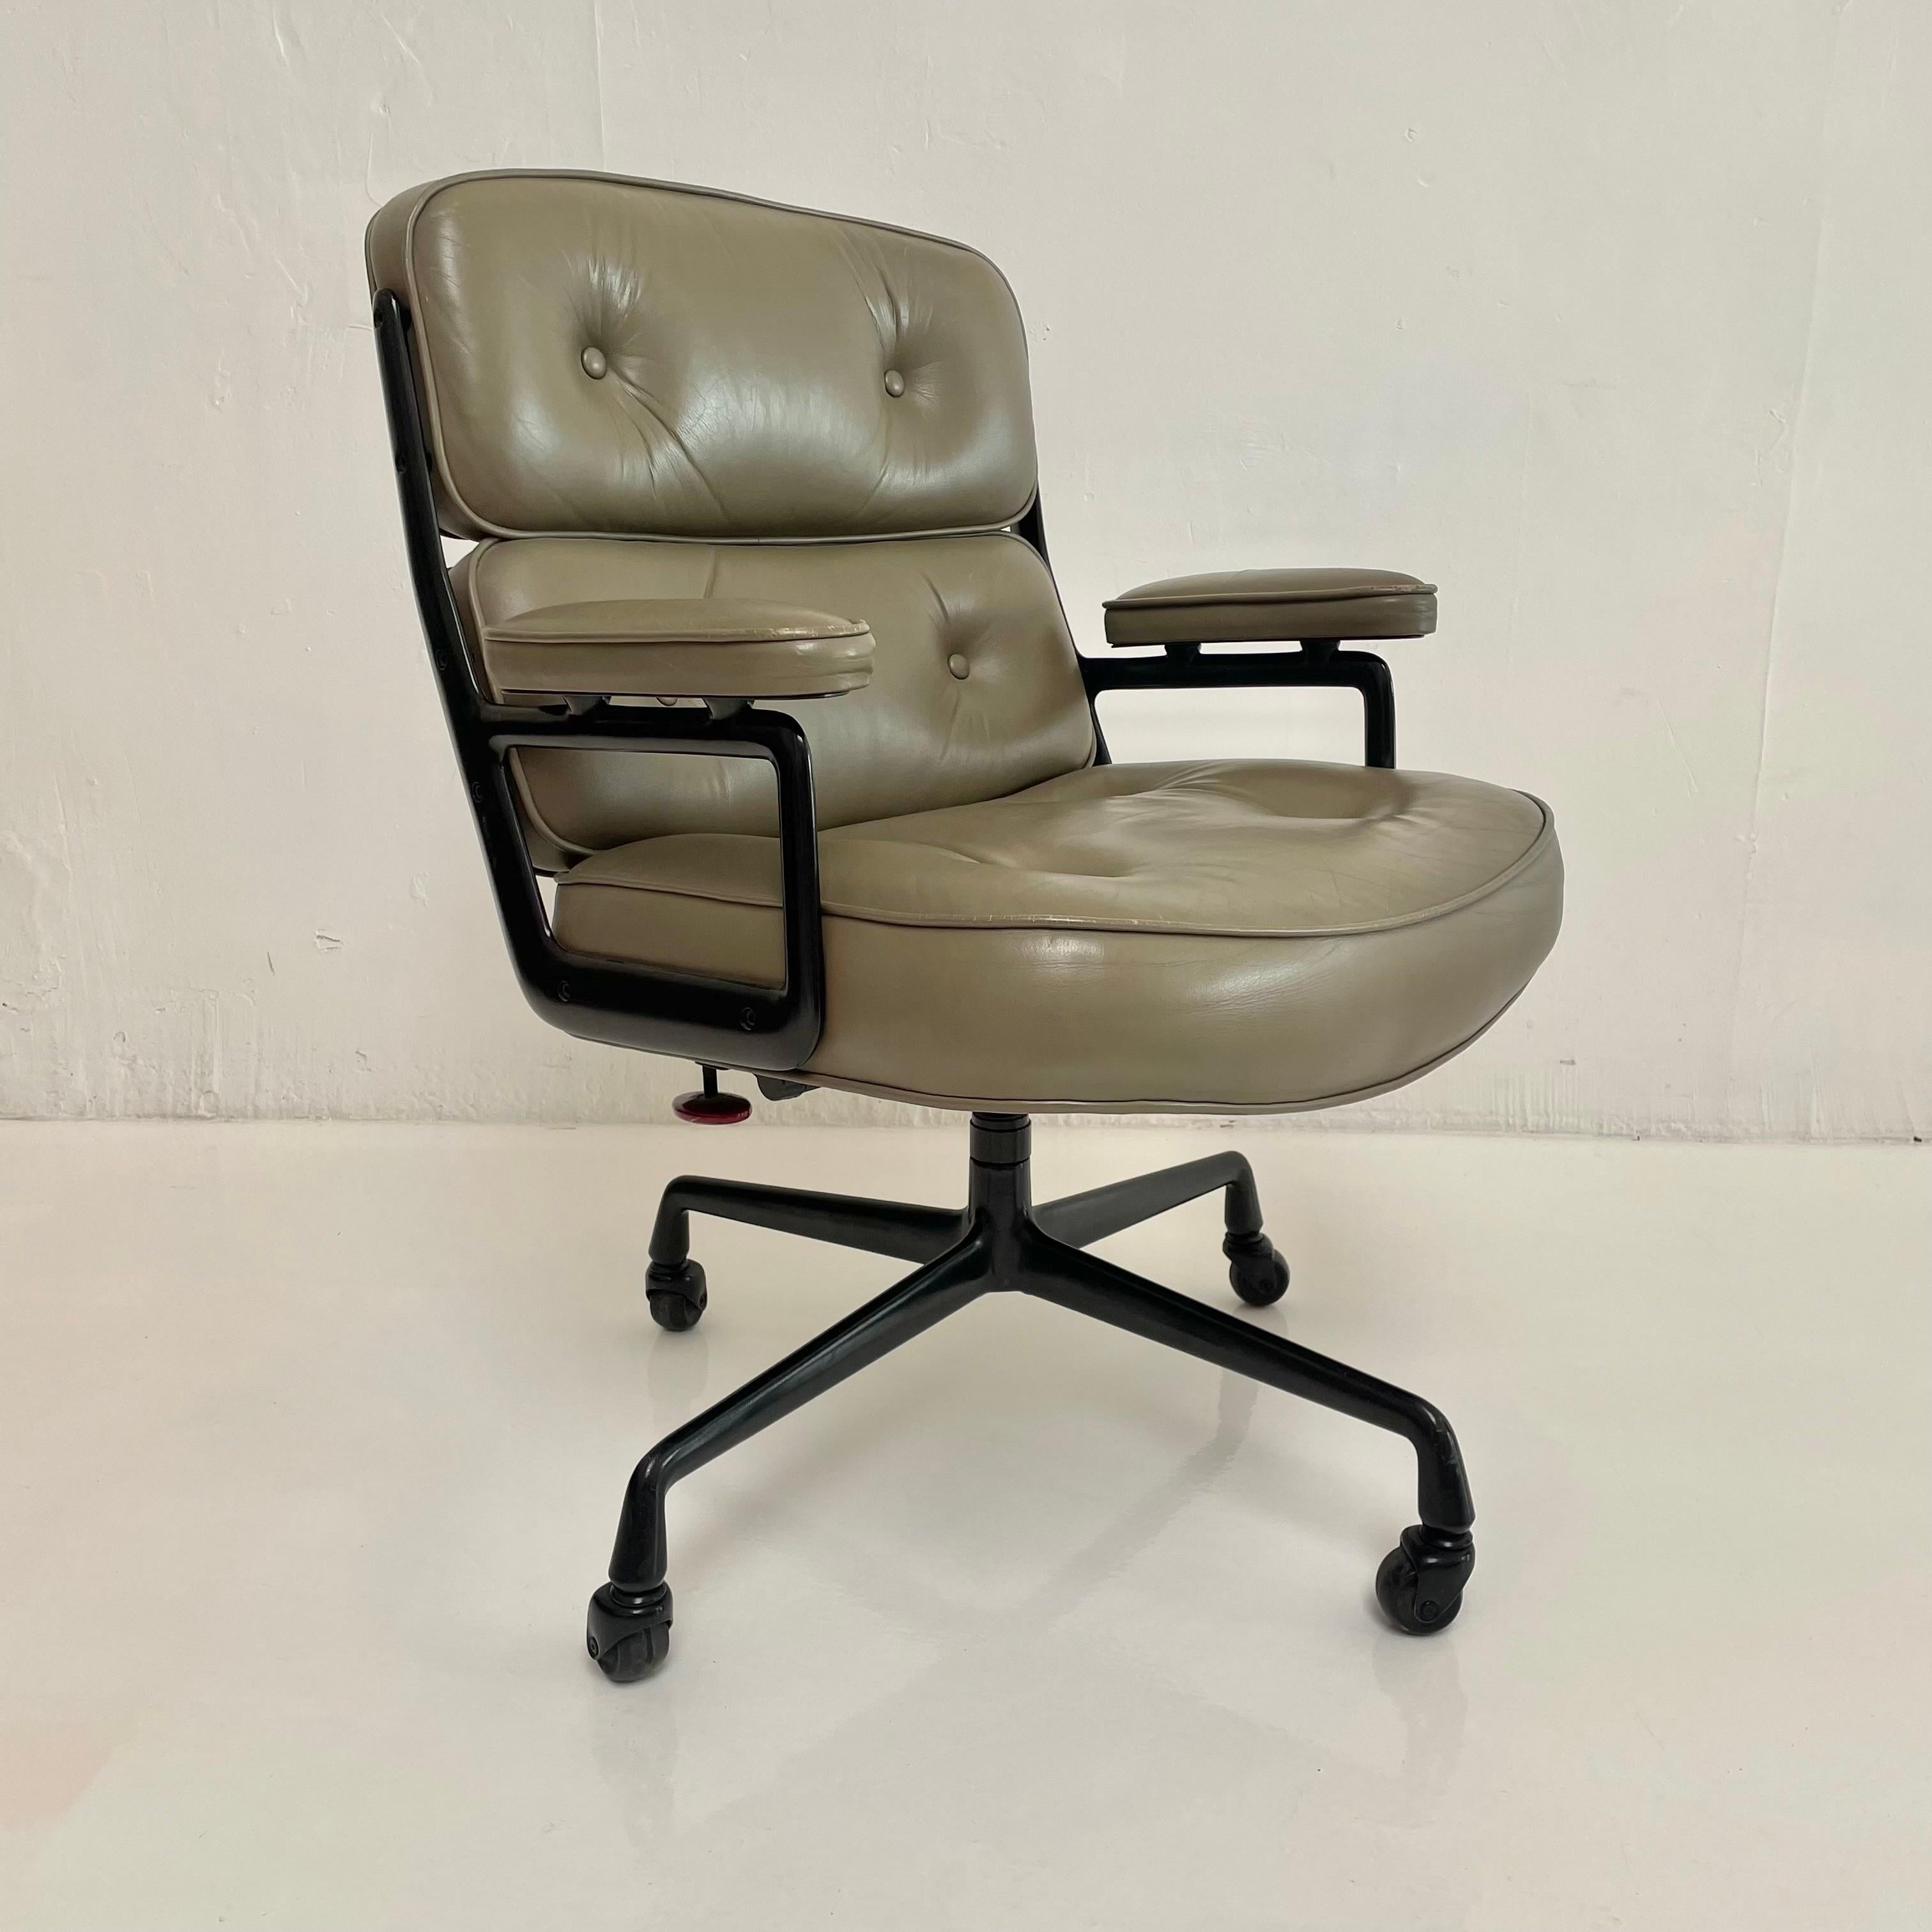 Classic Eames Time Life Chair in olive leather for Herman Miller, circa 1984. Olive-coloured leather with wear as shown. Extremely comfortable and worn in. Chair swivels and reclines. Height is adjustable. Rarely seen black powder coated metal frame